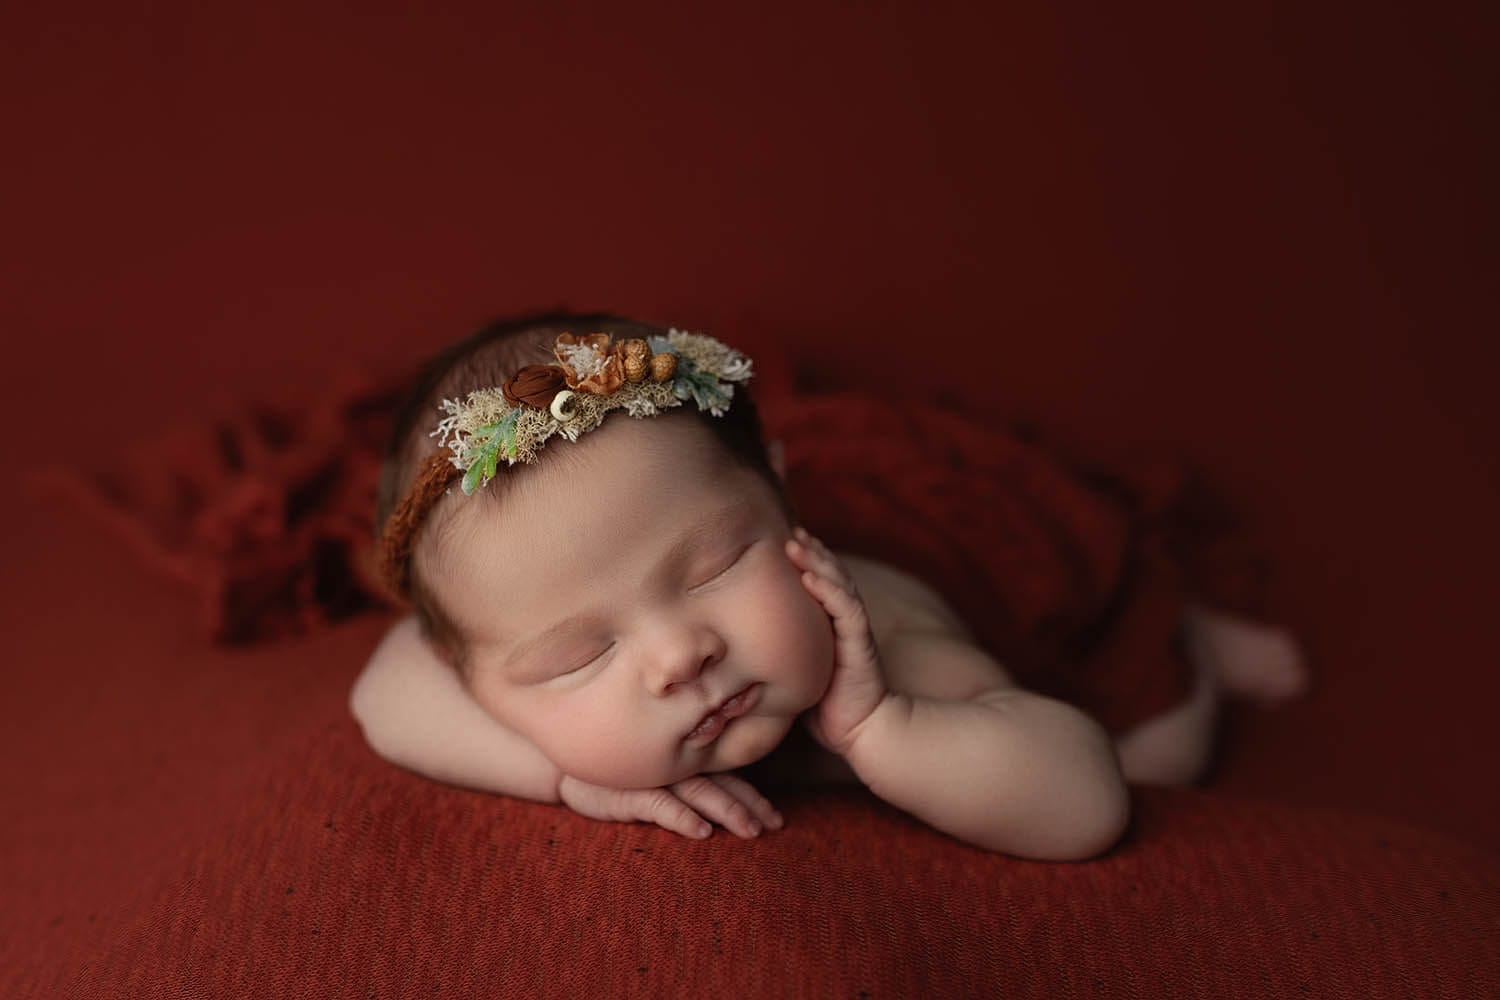 A sleeping newborn baby lays on her stomach with a hand on her cheek and a floral headband after meeting new orleans pediatricians